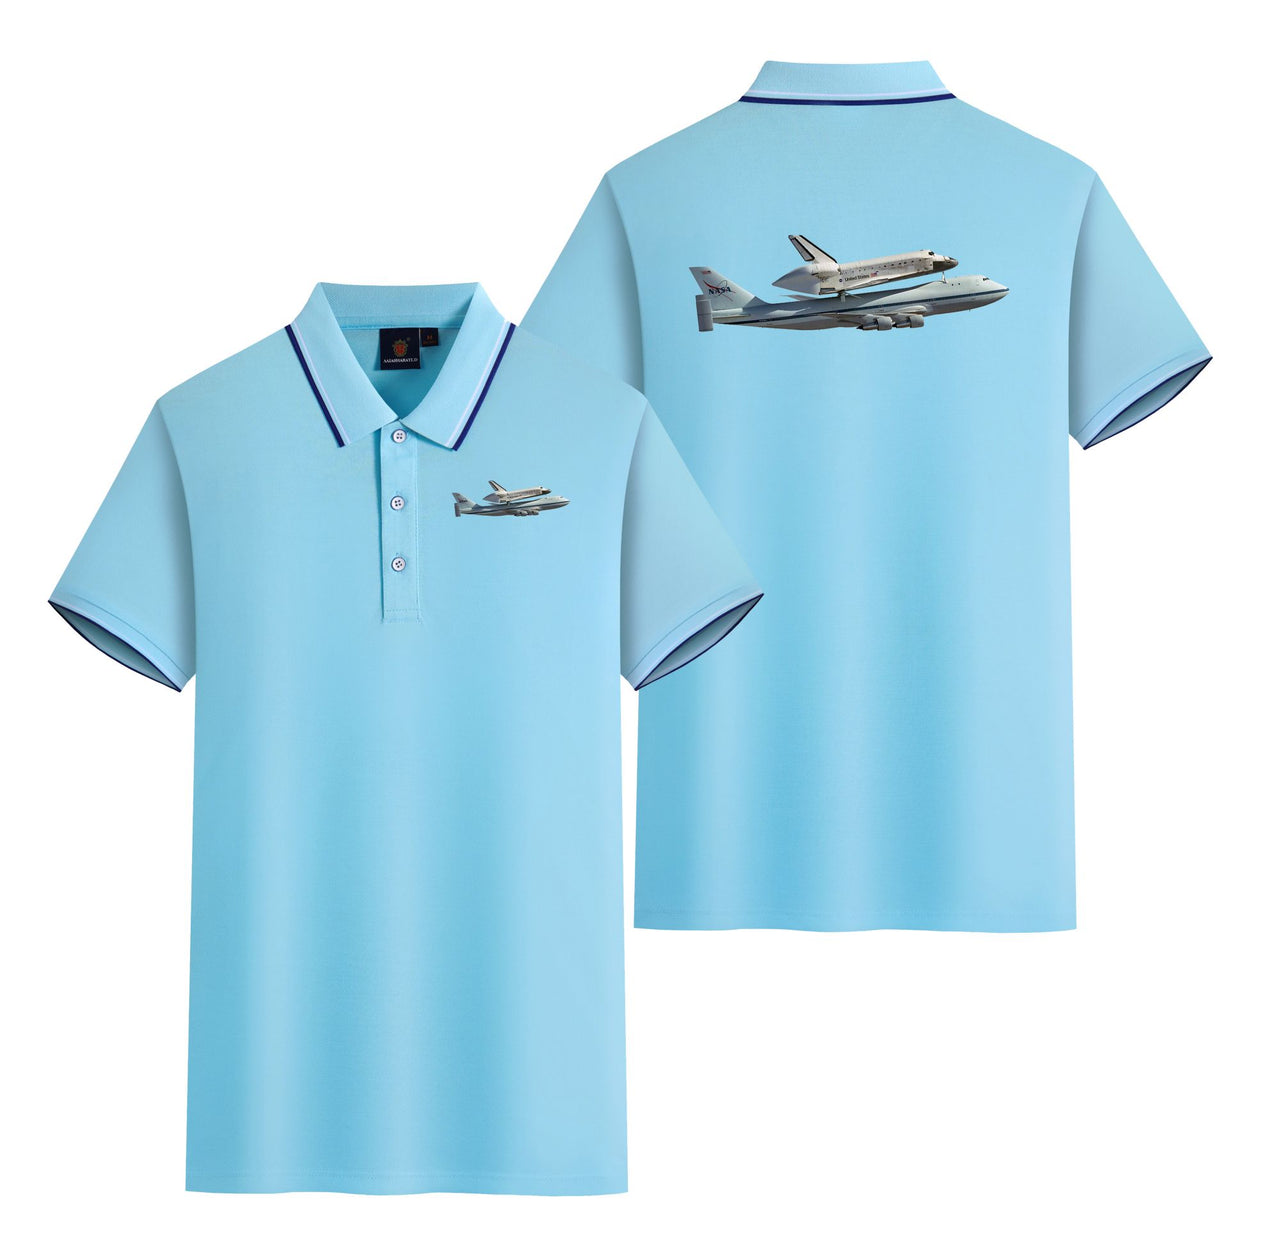 Space shuttle on 747 Designed Stylish Polo T-Shirts (Double-Side)